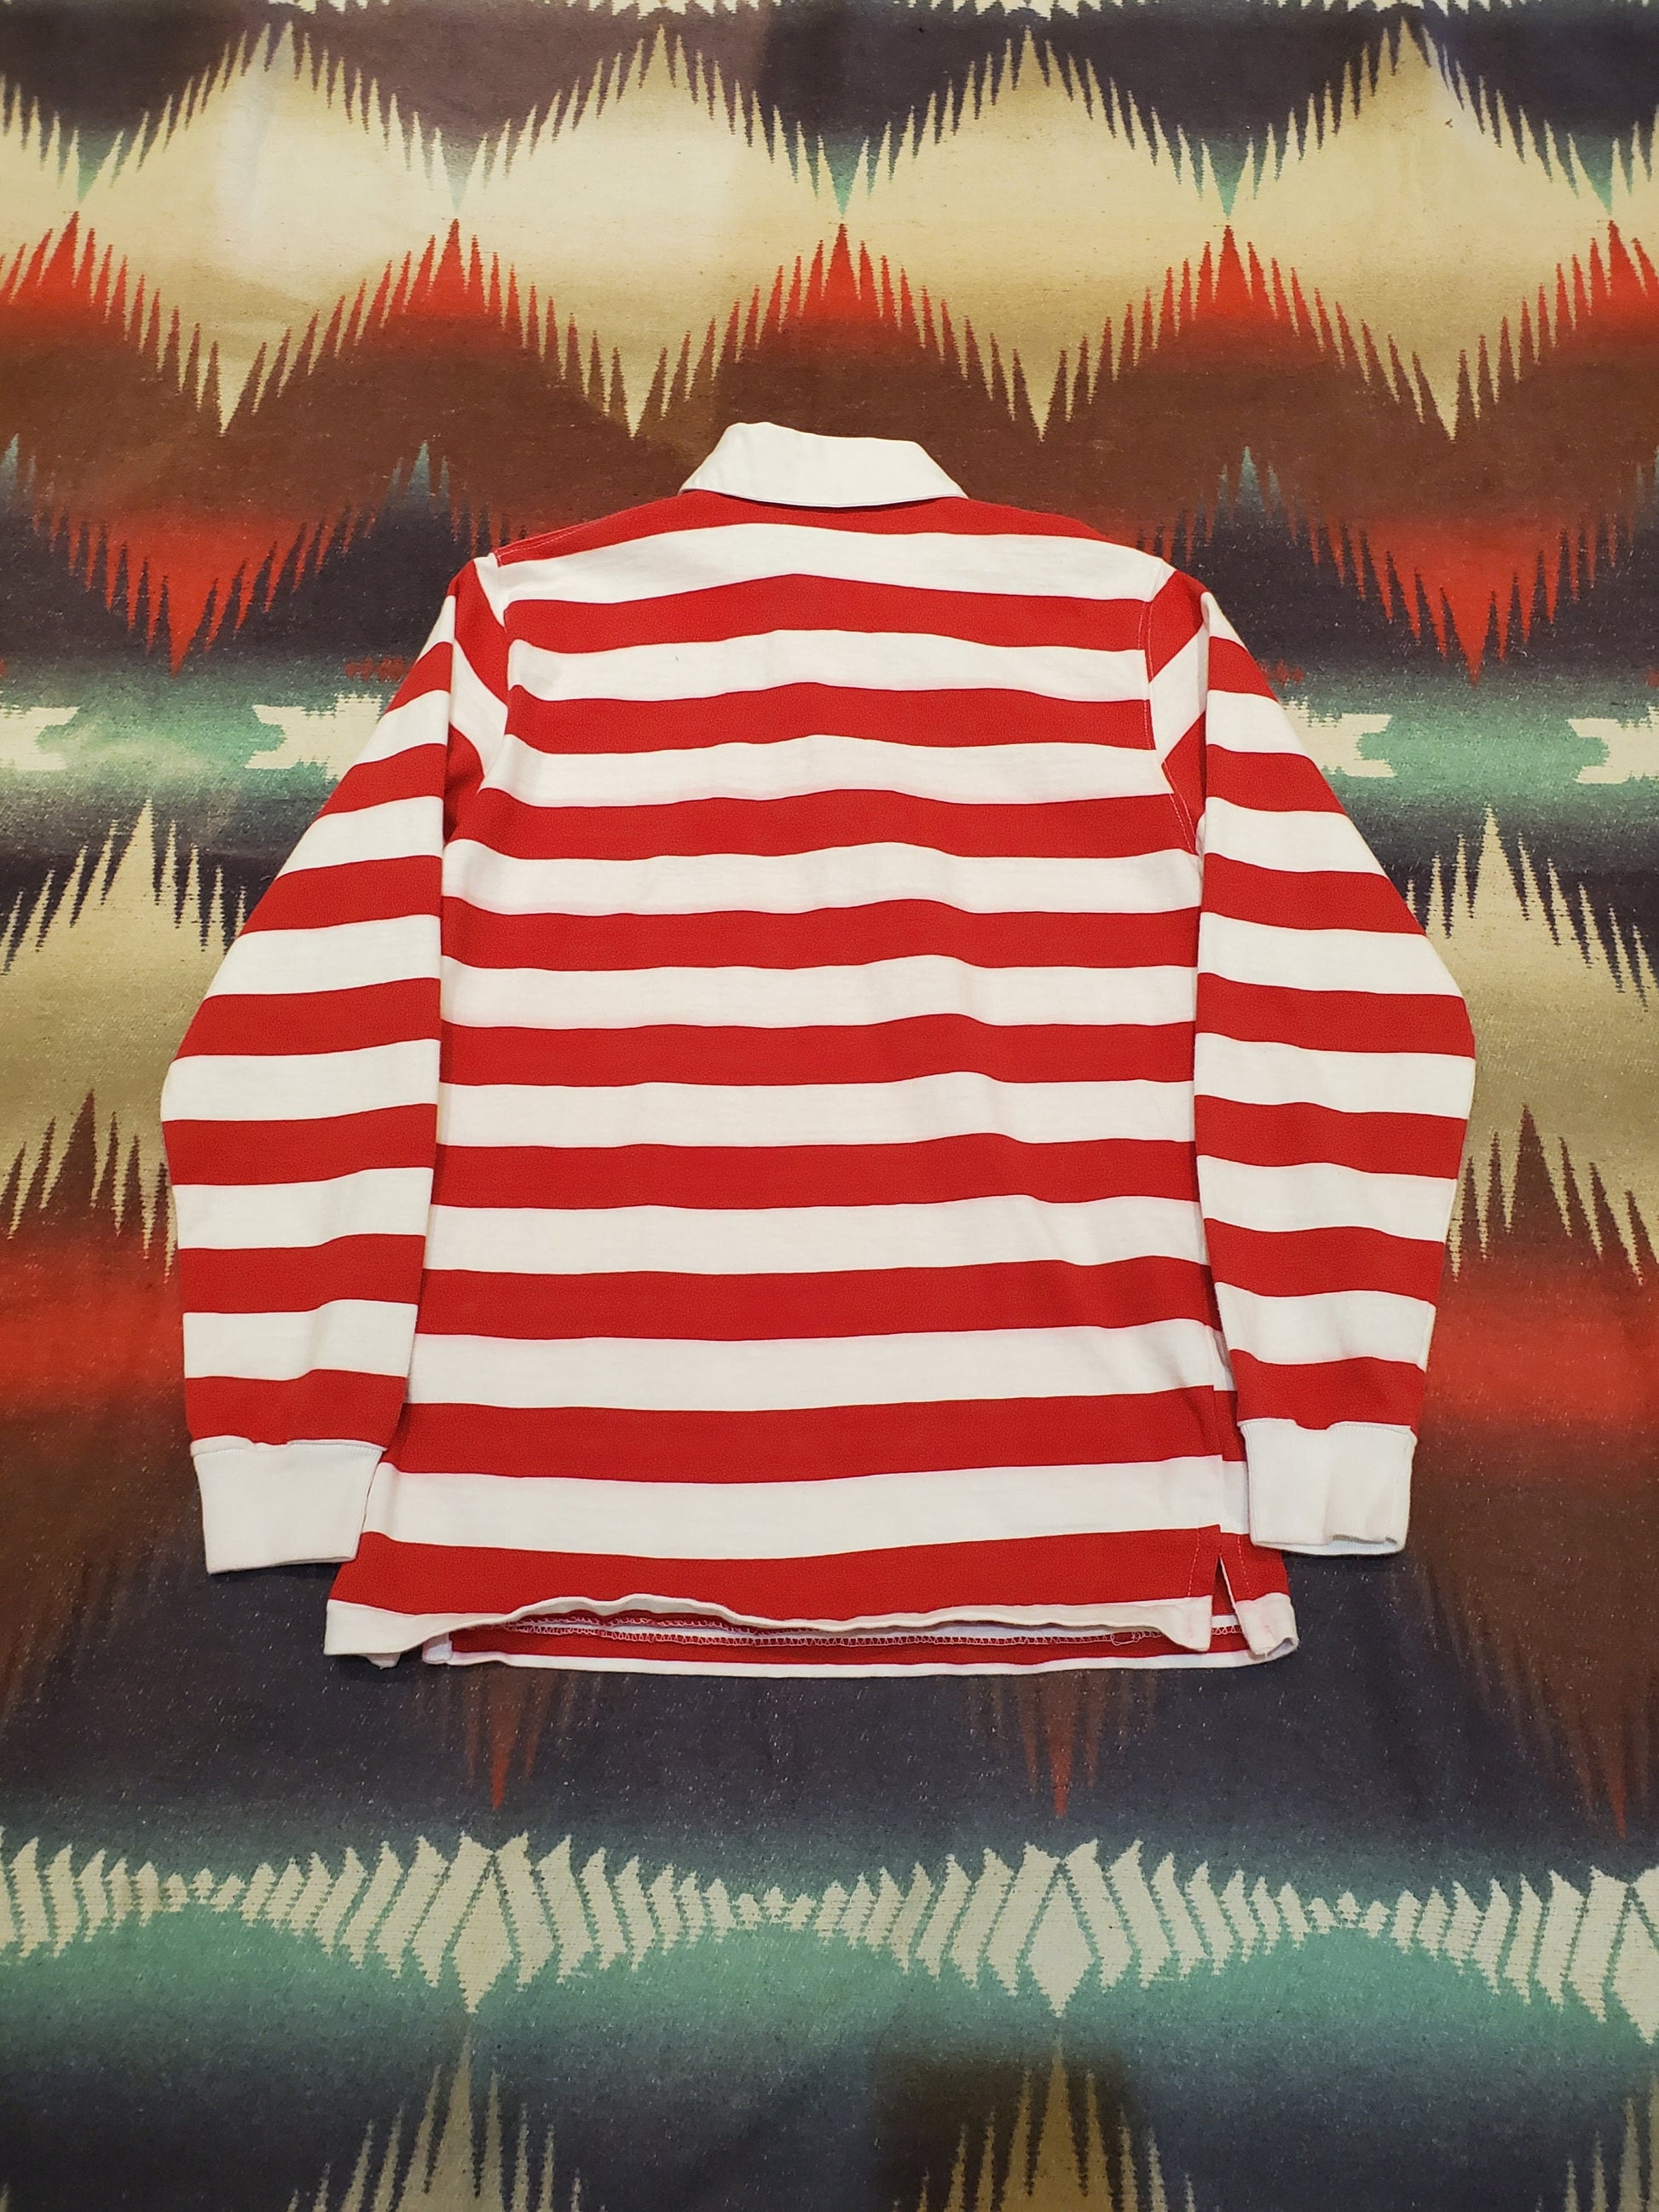 1980s/1990s Claybrooke Striped Longsleeve Rugby Shirt Size S/M